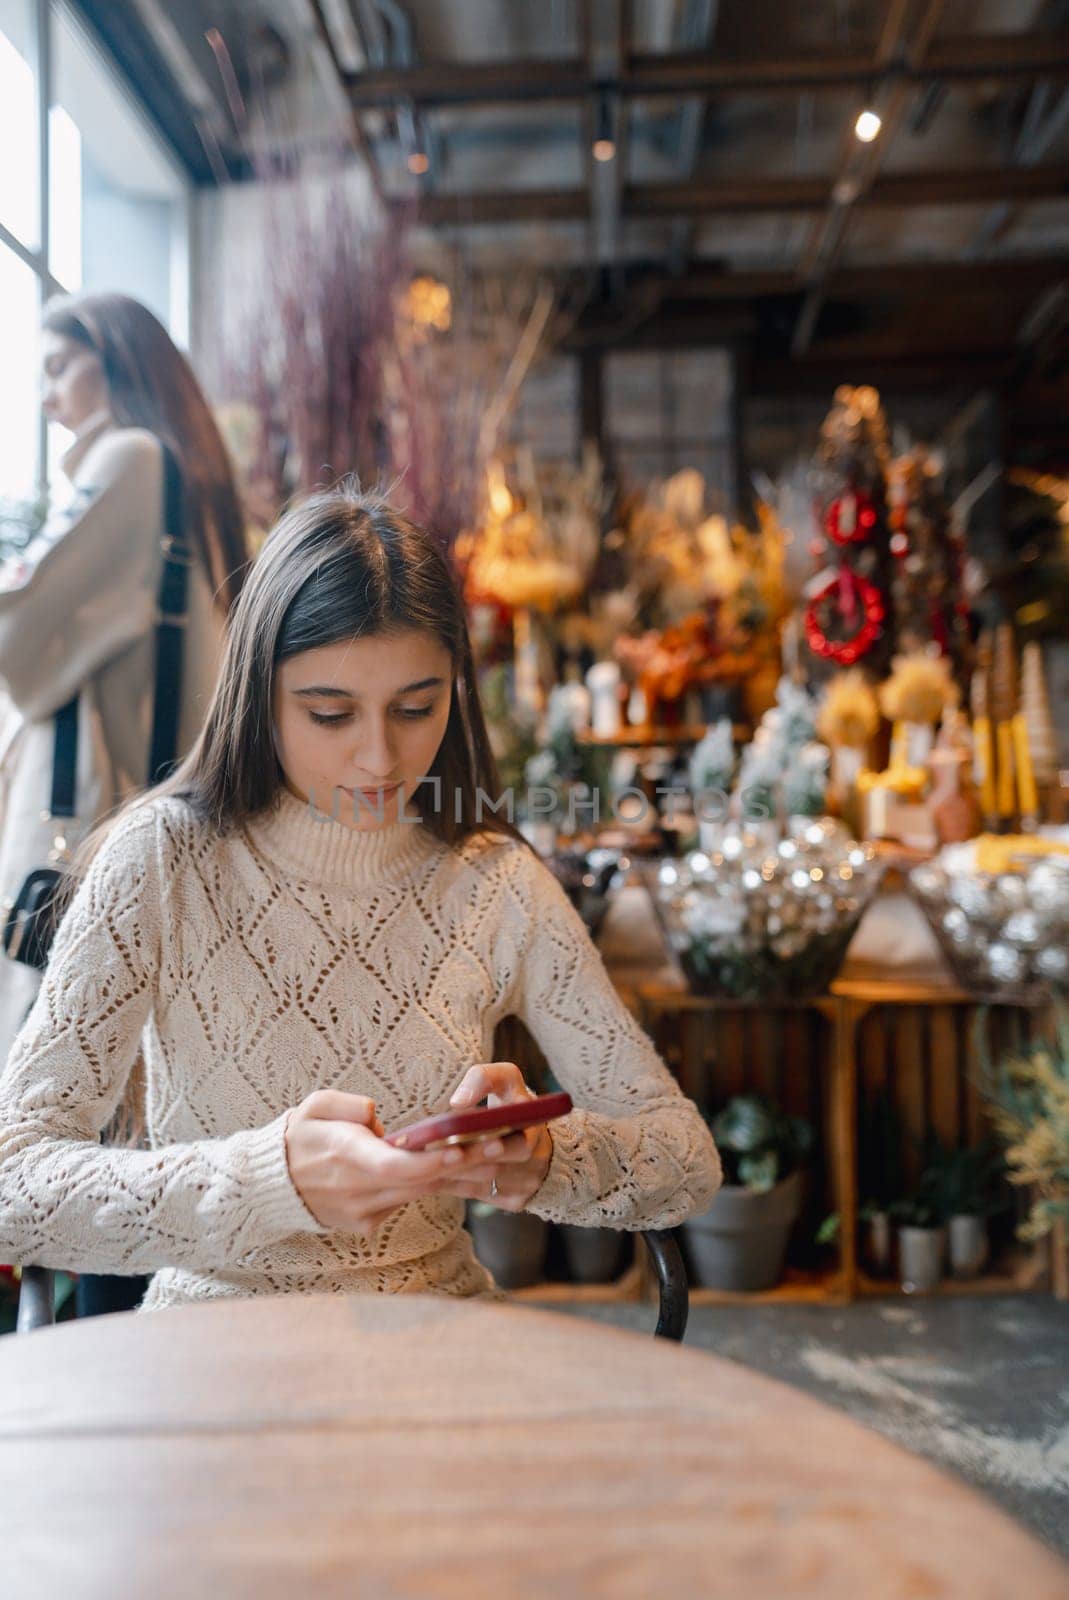 An eye-catching, radiant girl shopping for New Year's decor while using her smartphone. High quality photo